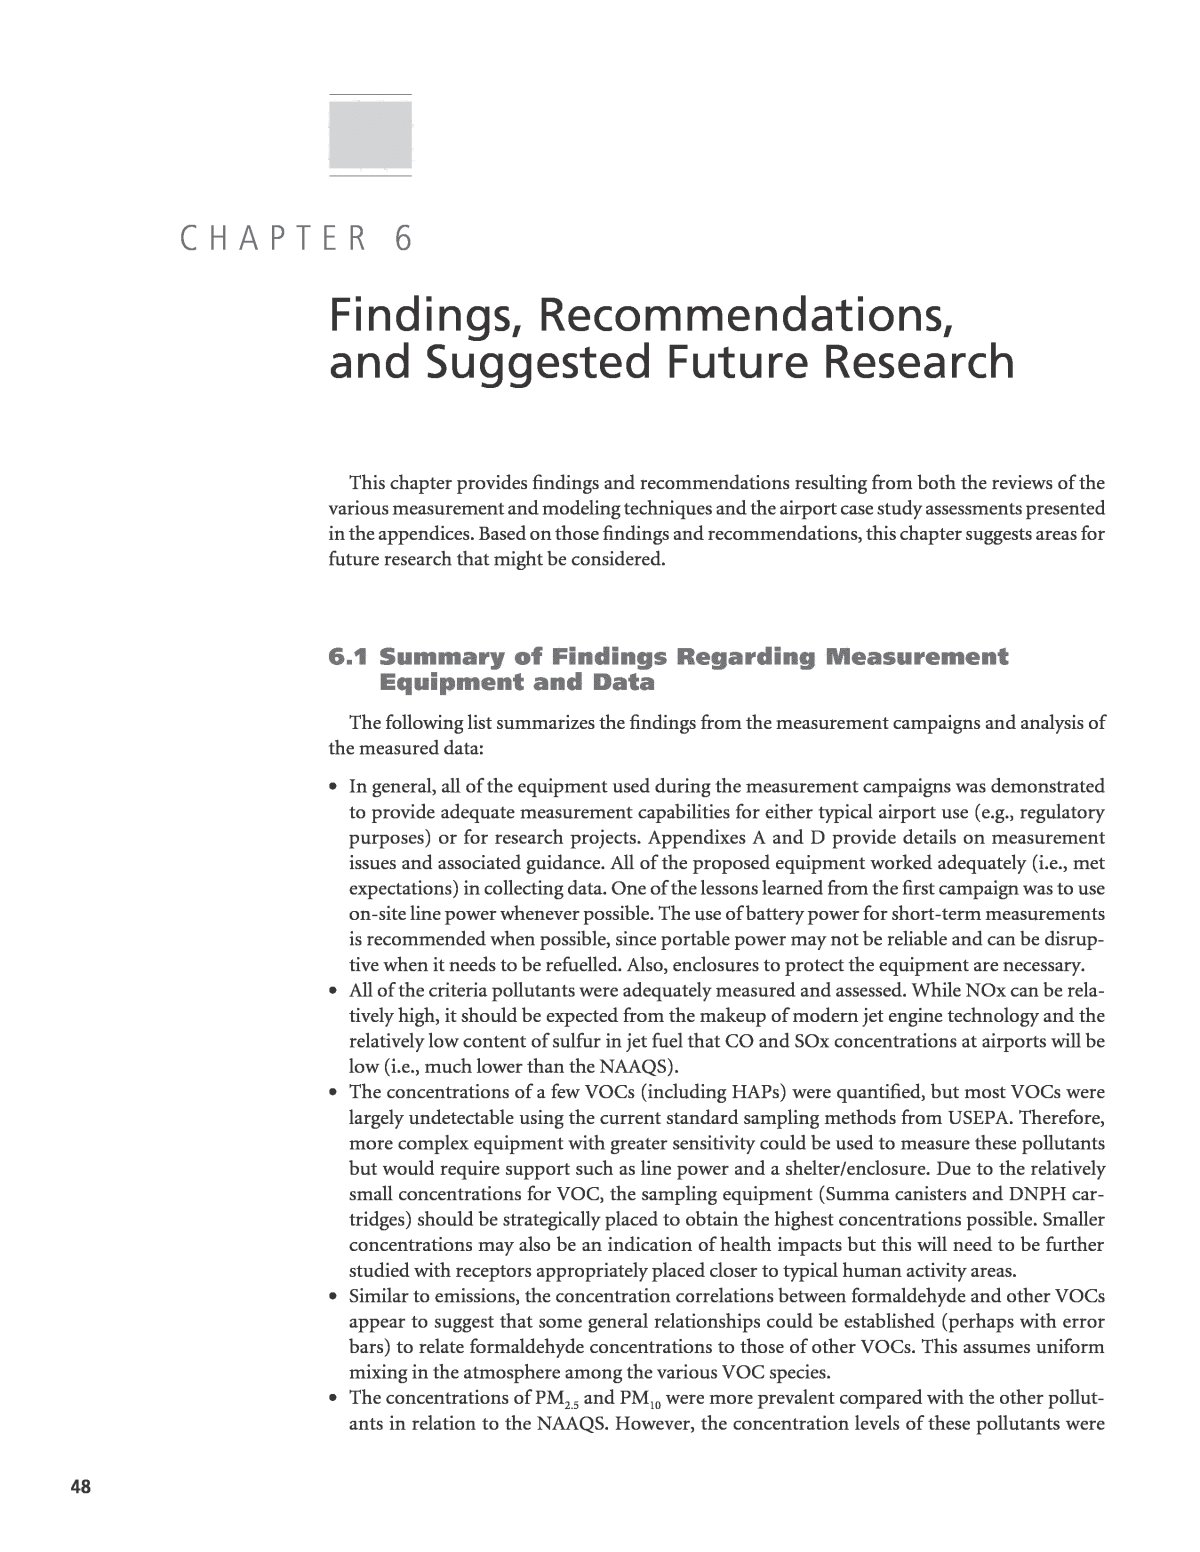 recommendation for the future research